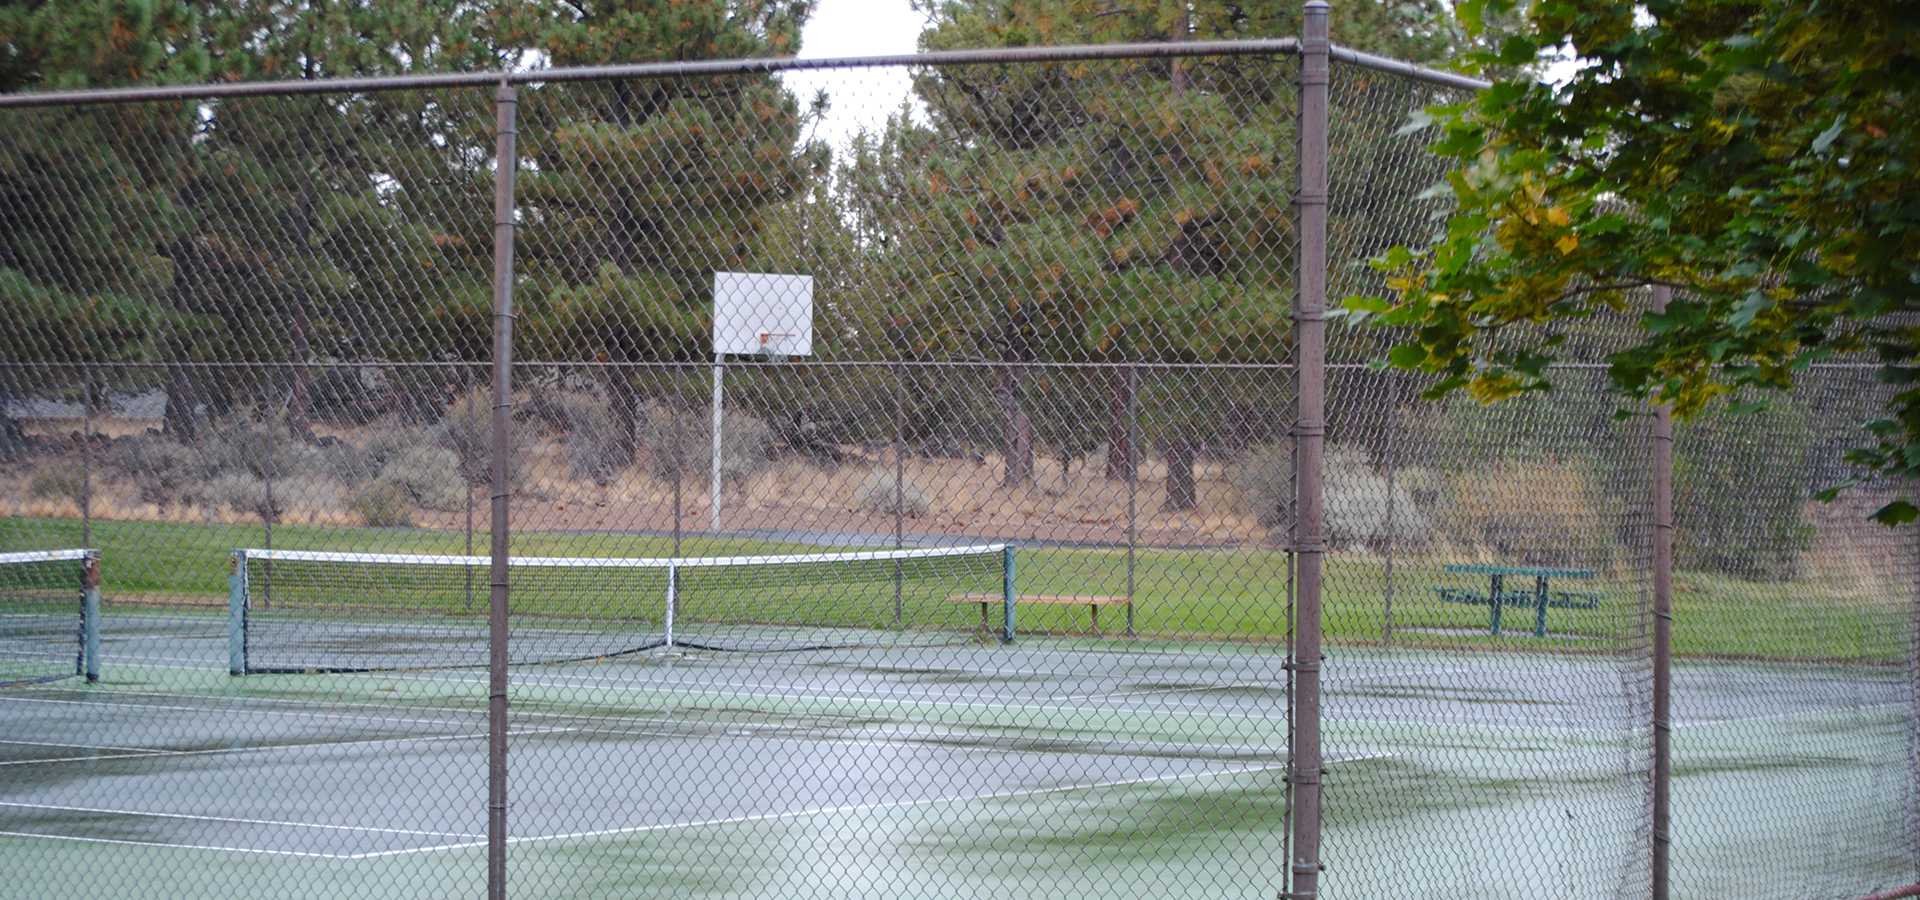 The tennis courts at Summit Park.